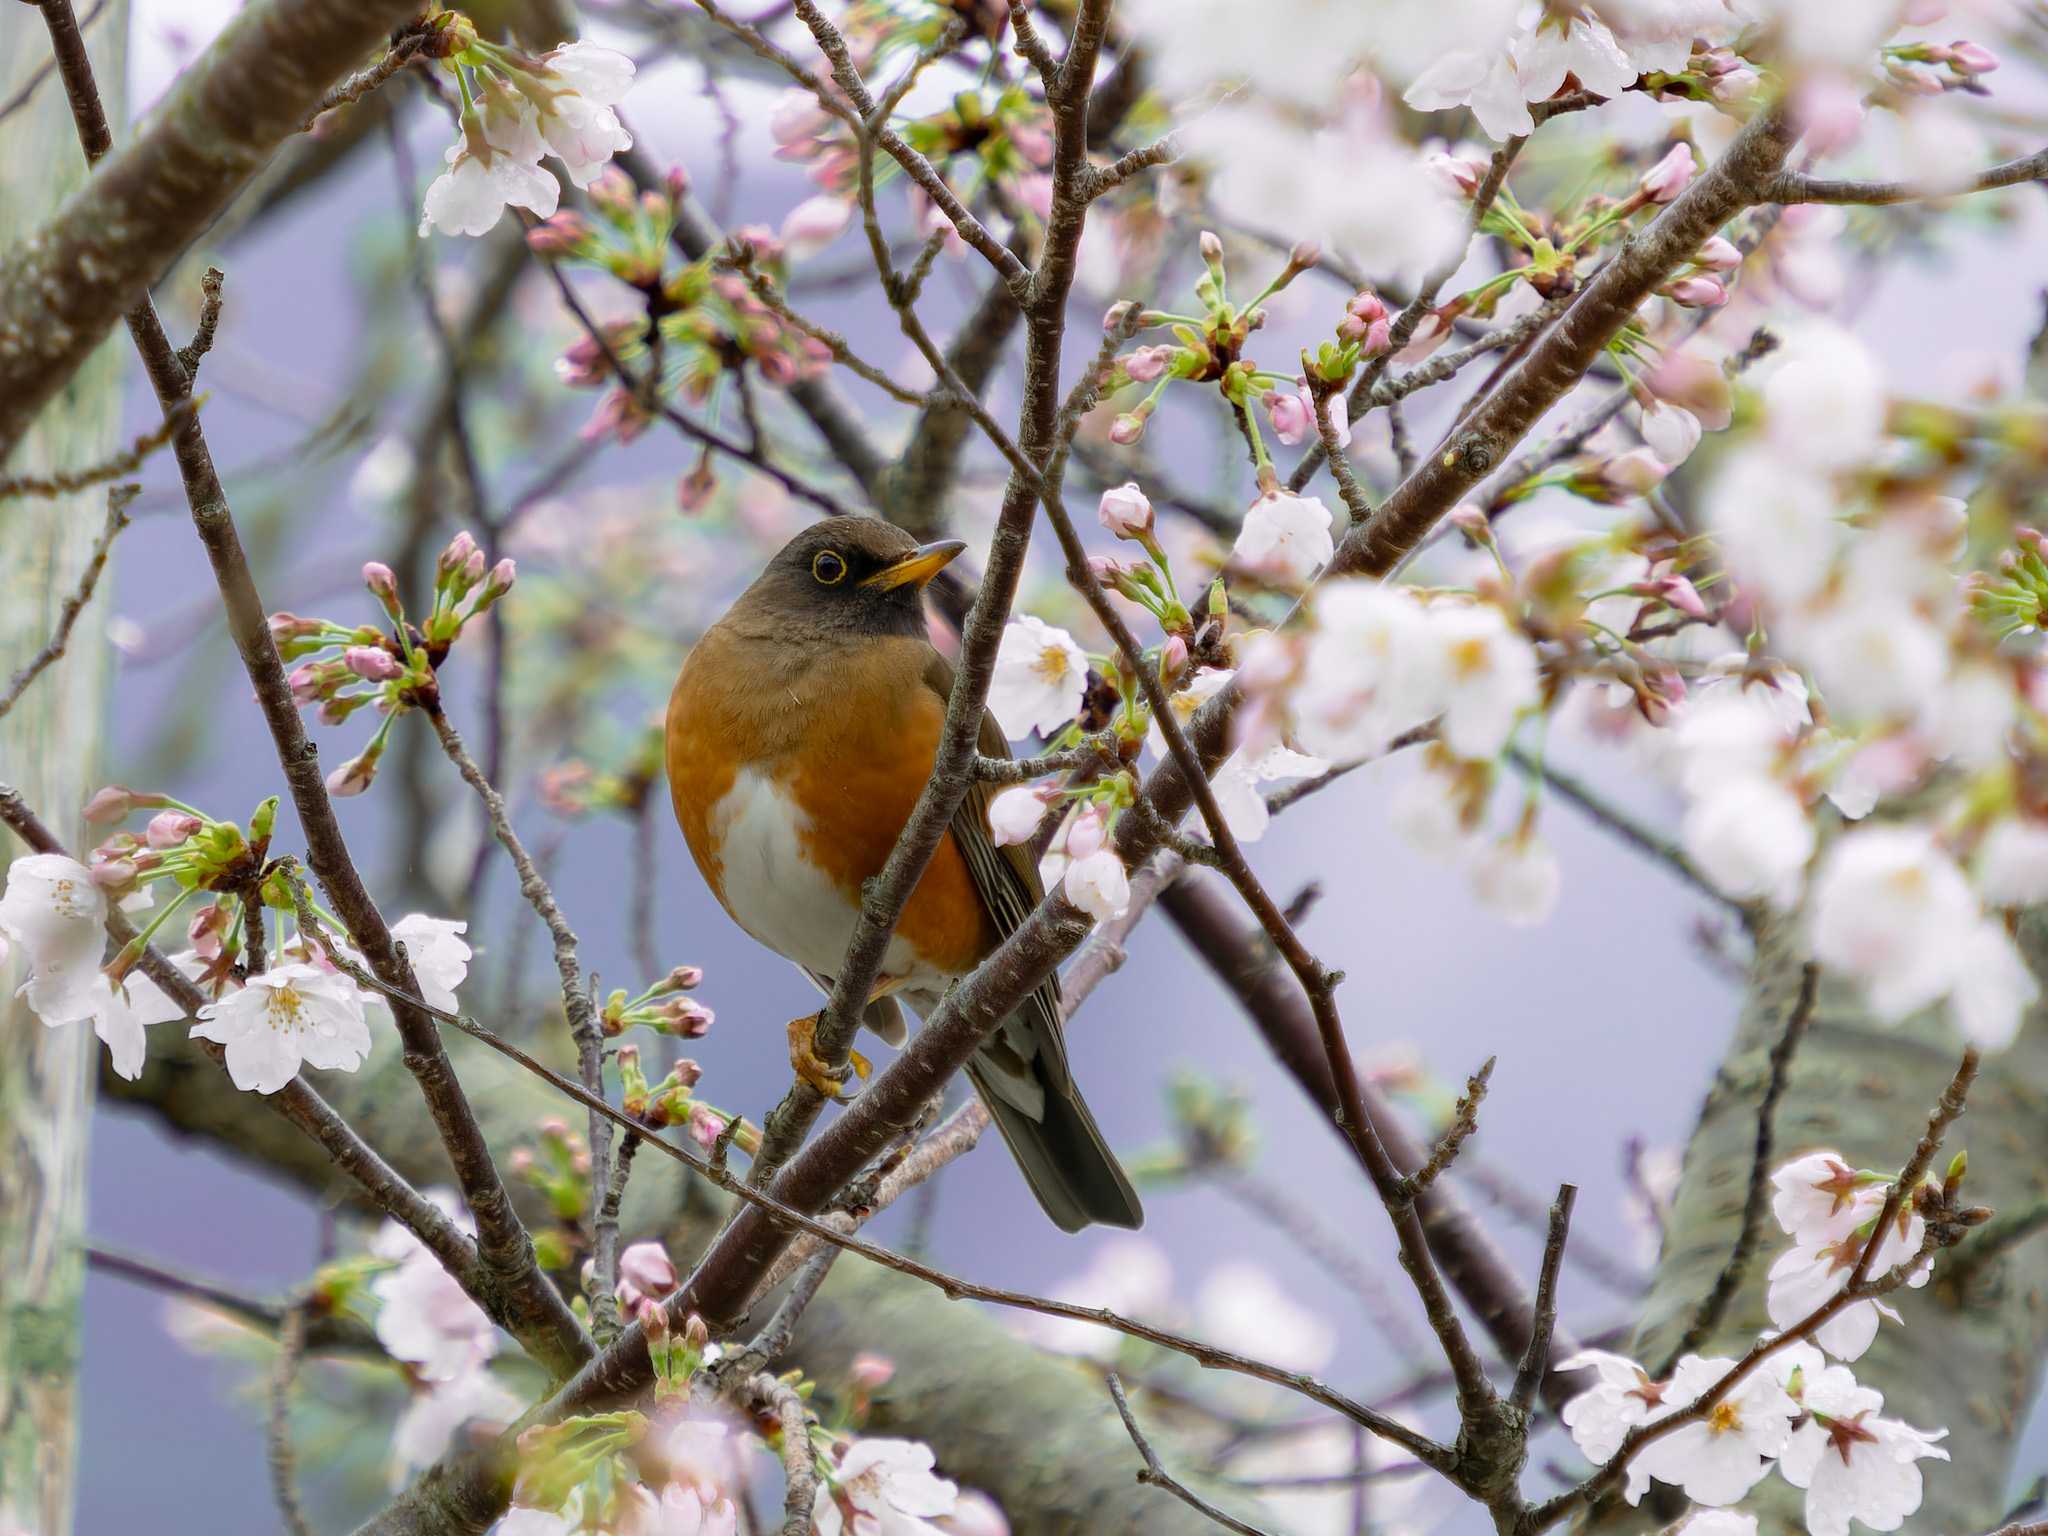 Photo of Brown-headed Thrush(orii) at 本河内高部ダム公園(長崎市) by ここは長崎